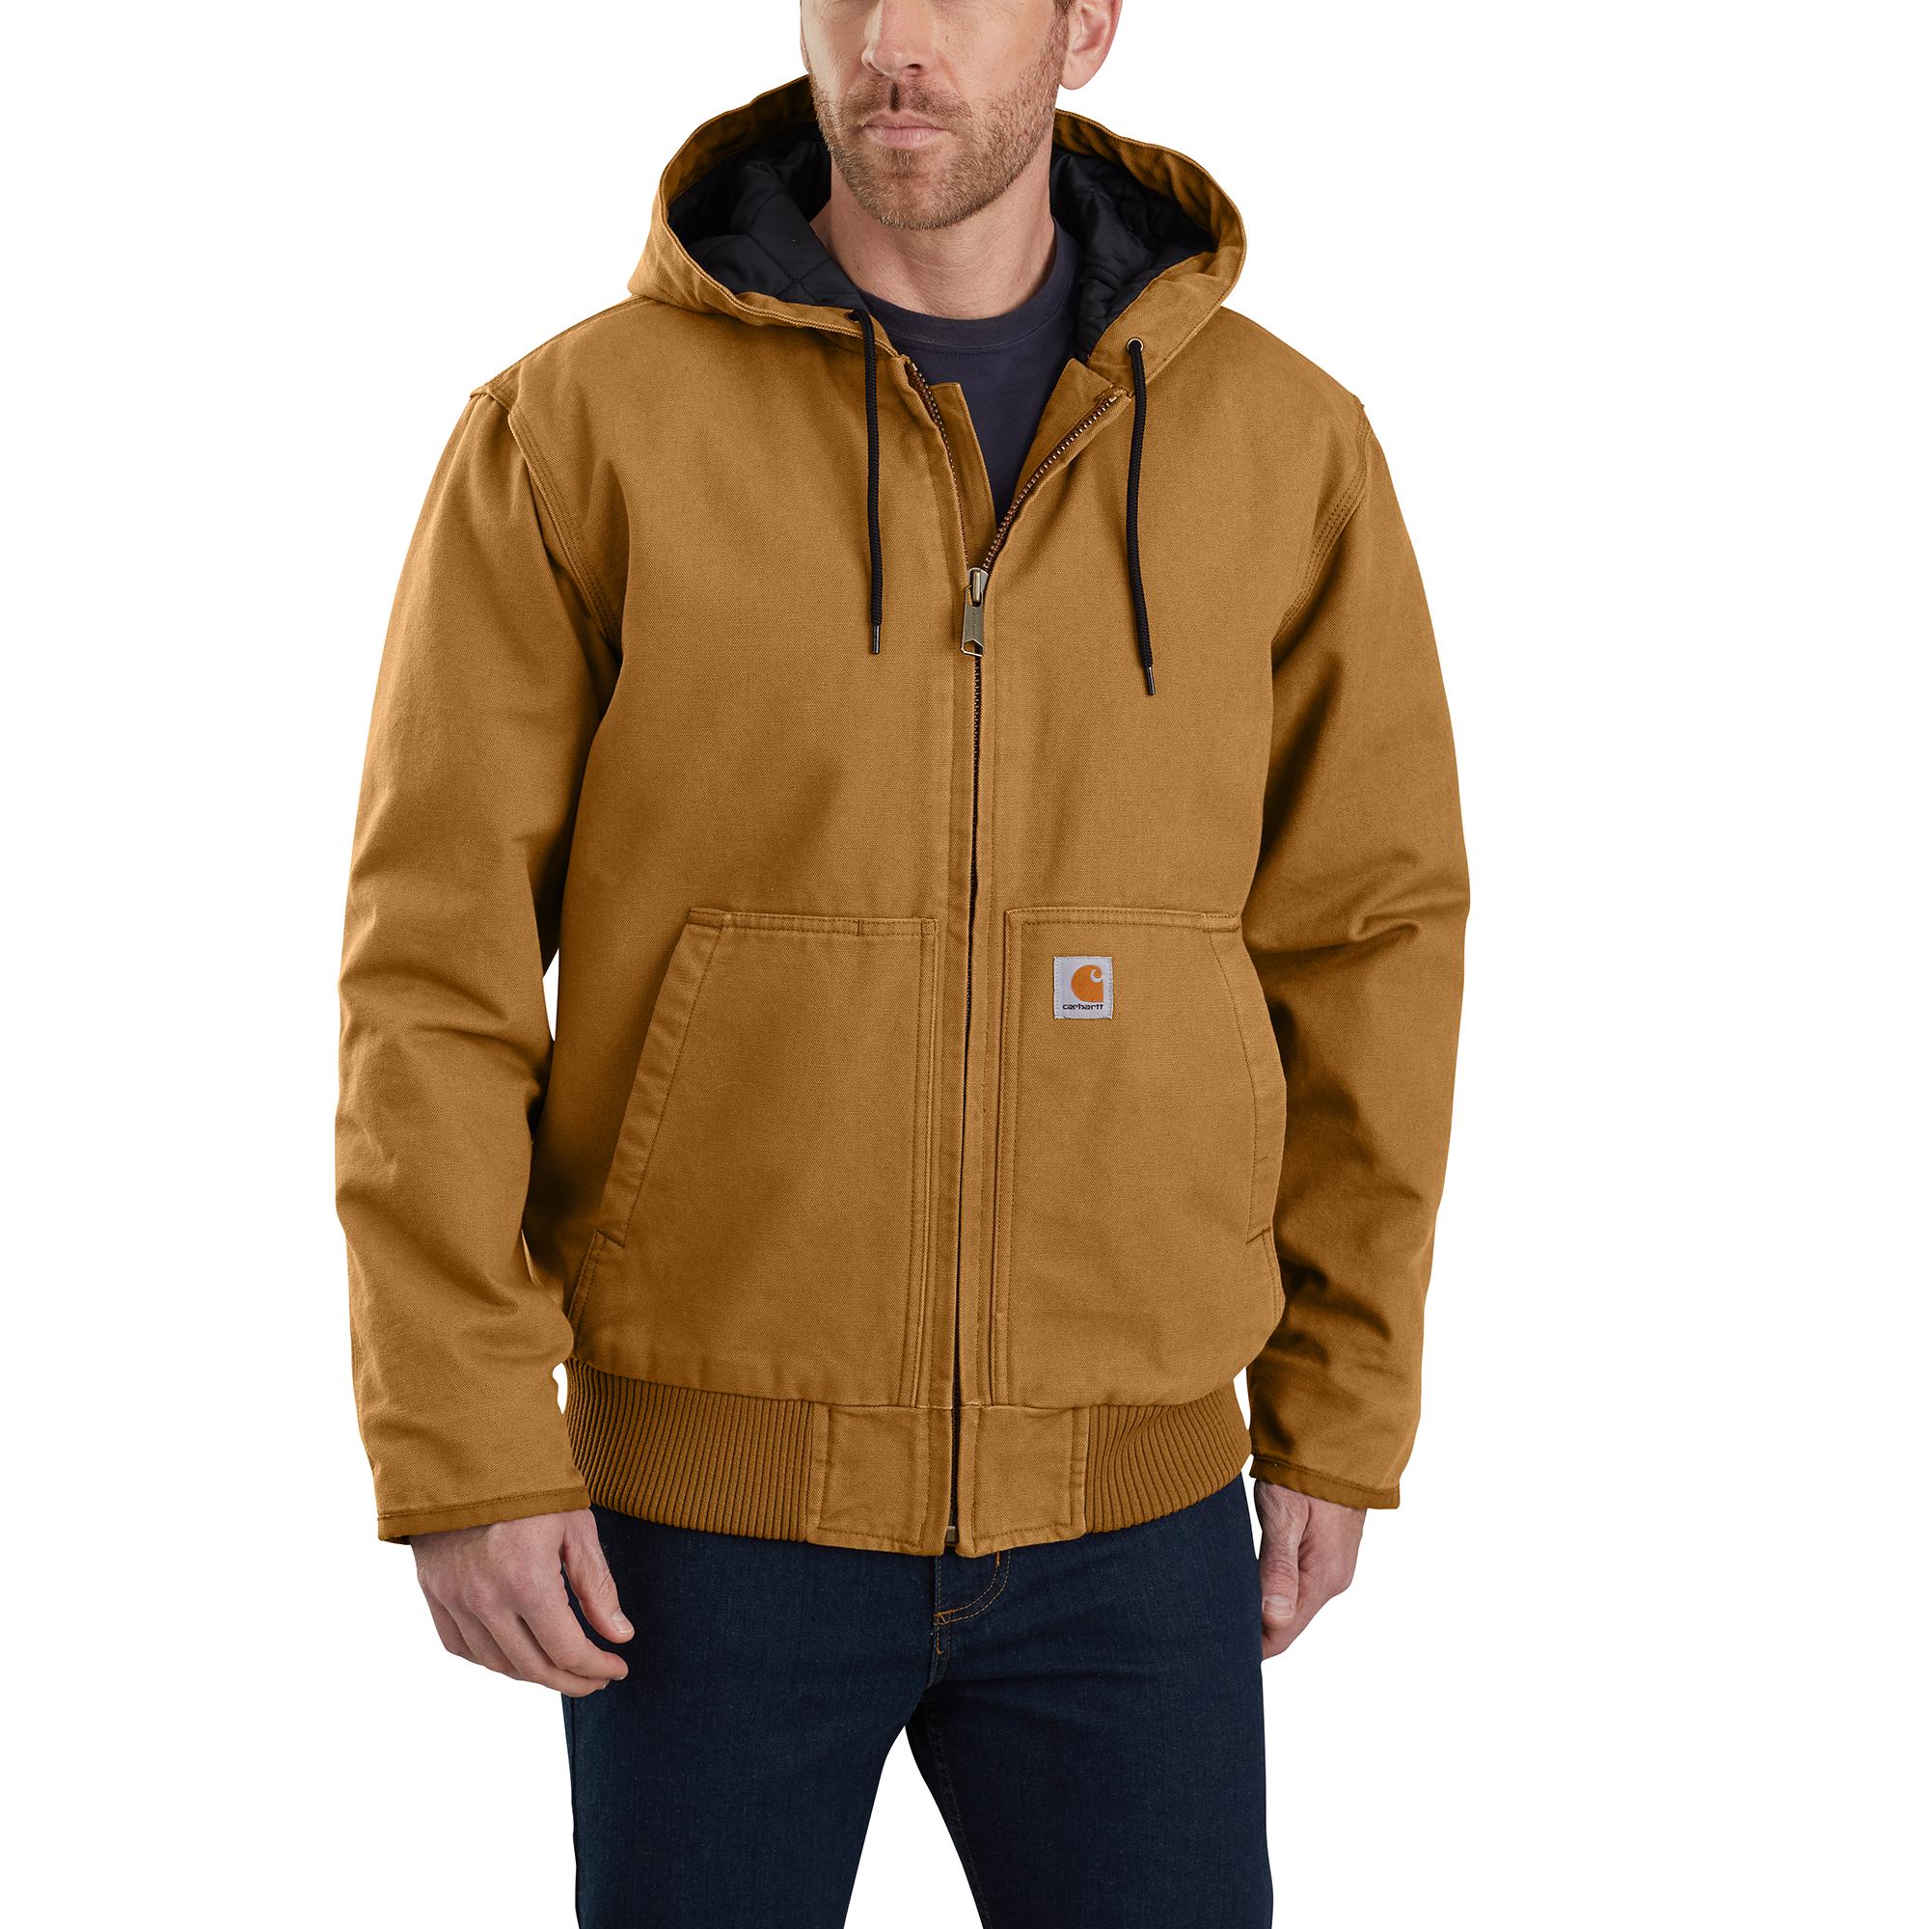 Ranch and Farm Clothing for Winter Work